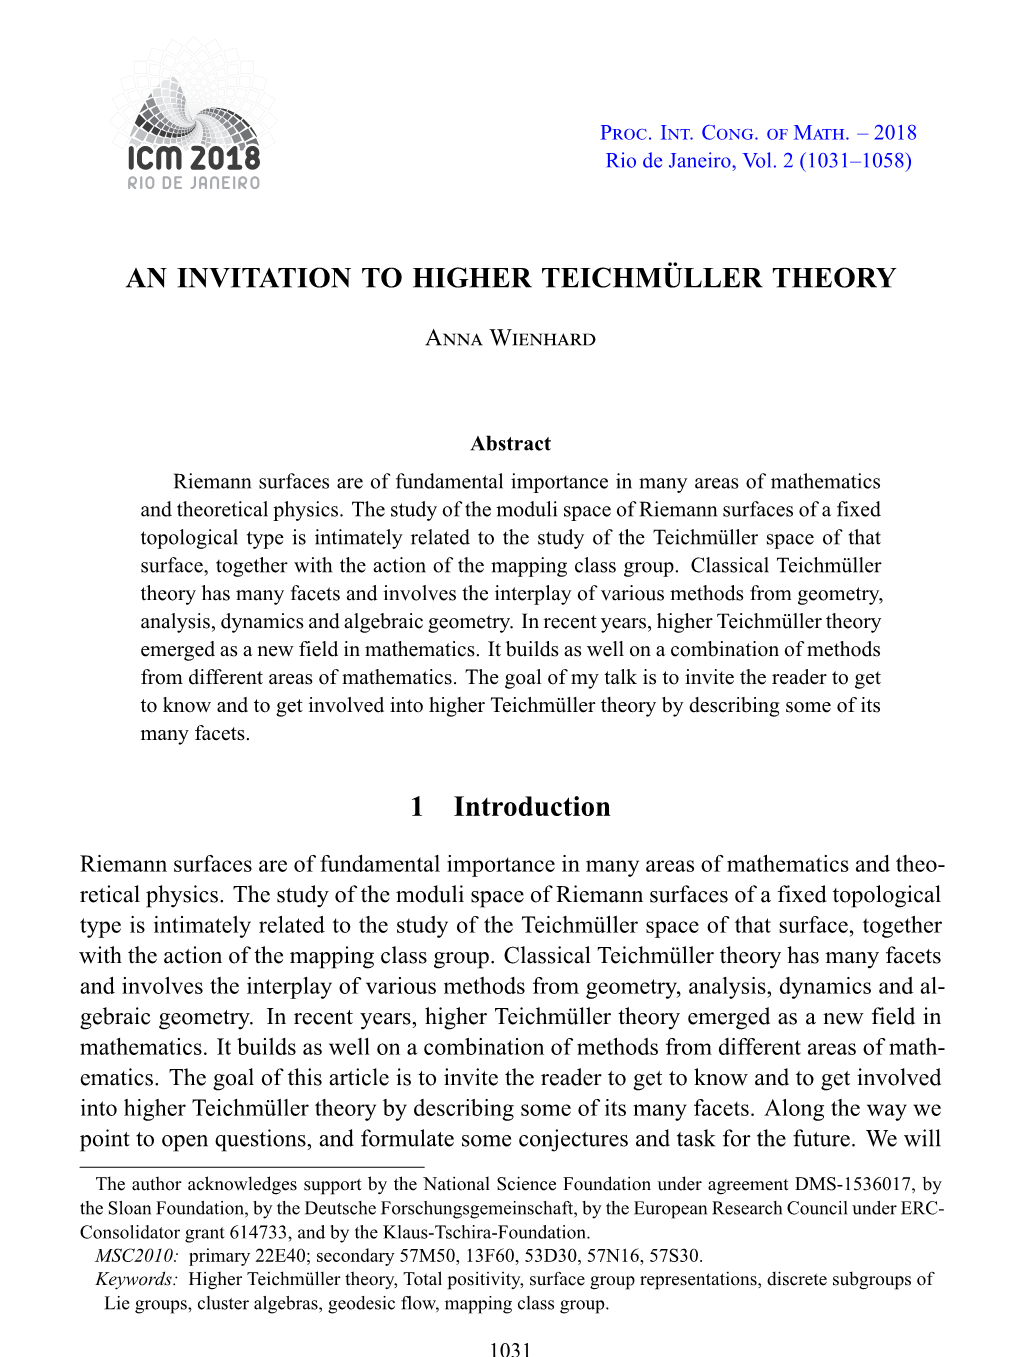 An Invitation to Higher Teichmüller Theory